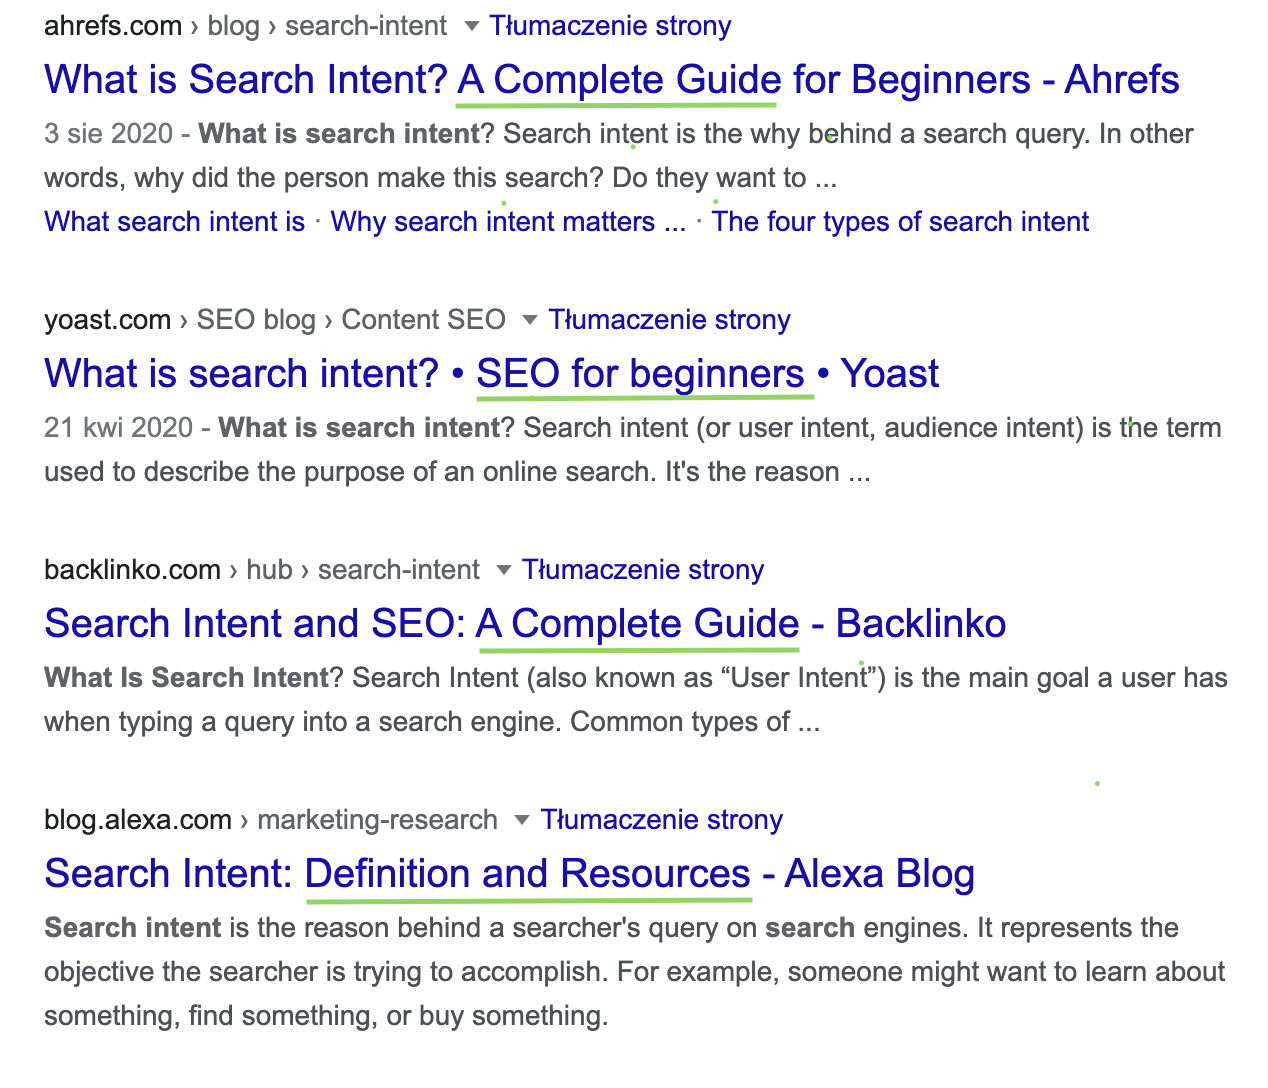 SERP for the what is search intent query